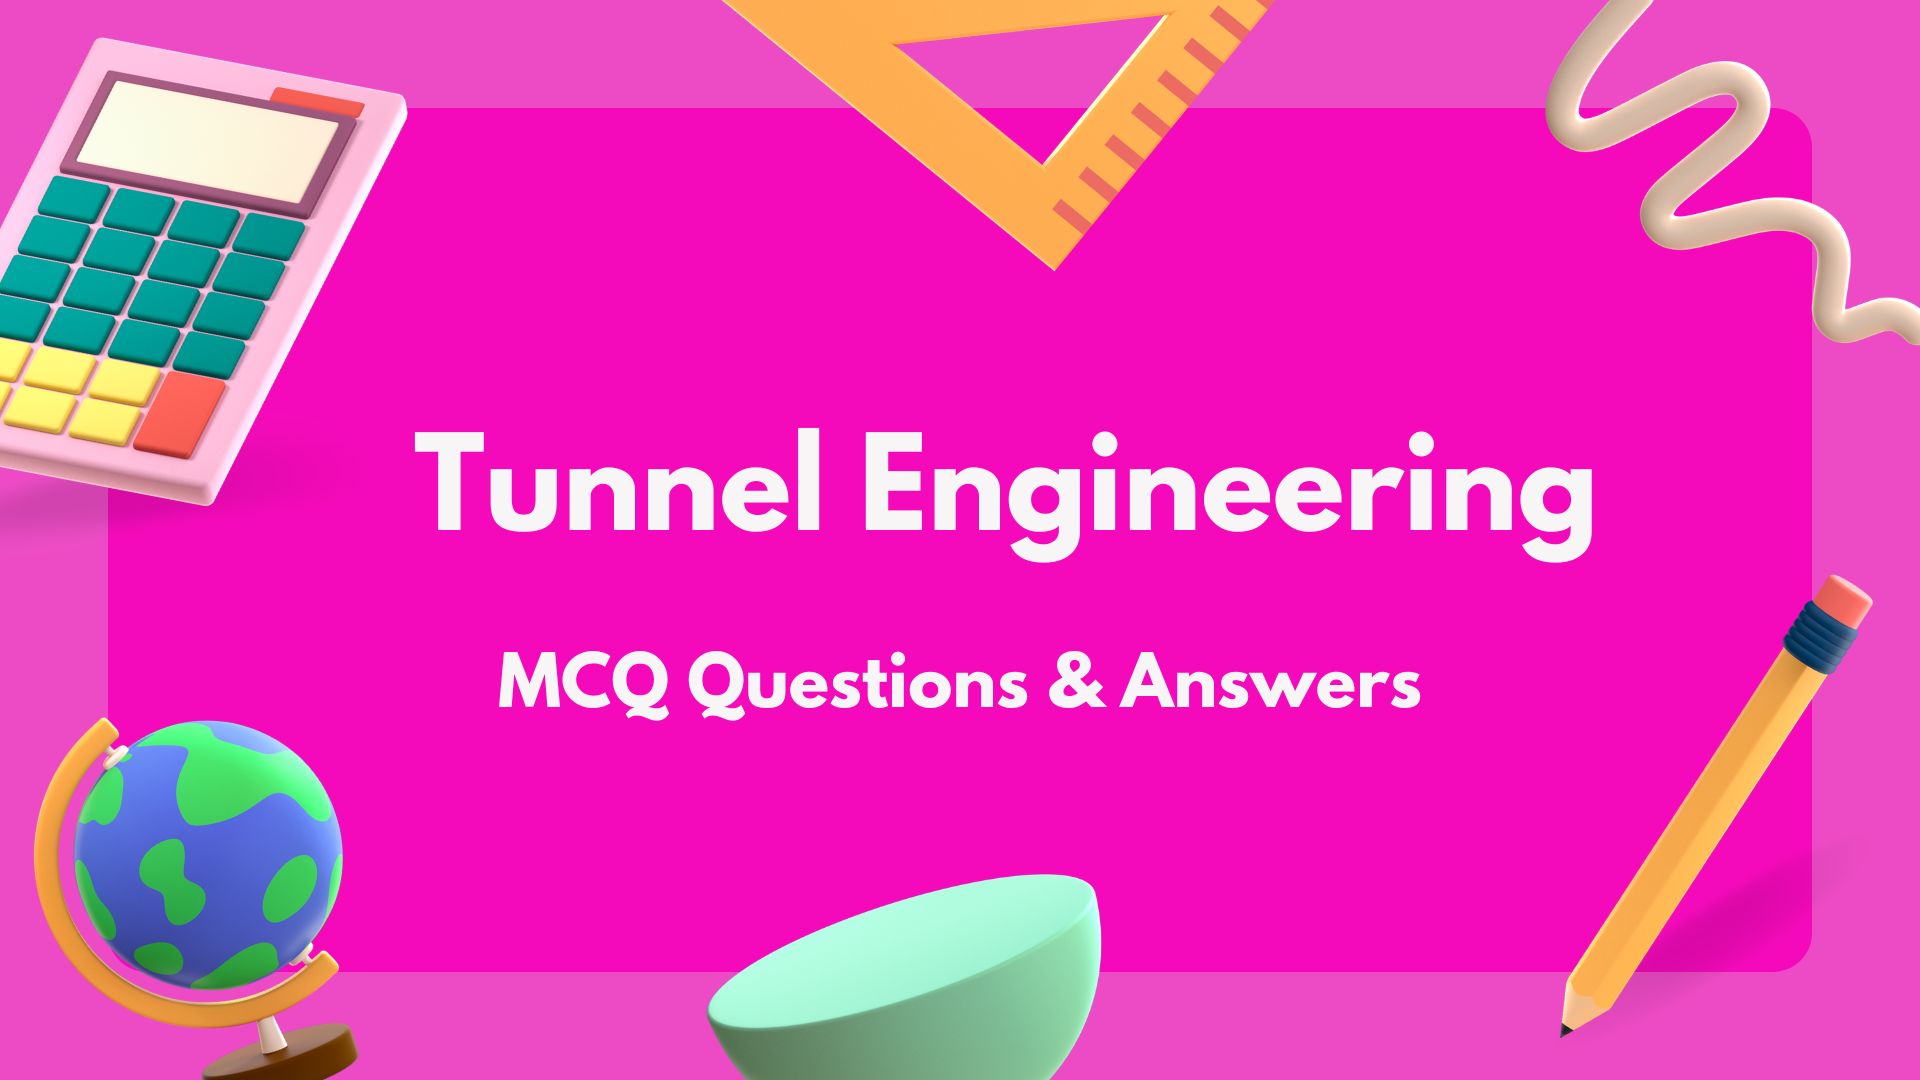 Tunnel Engineering MCQ Questions & Answers